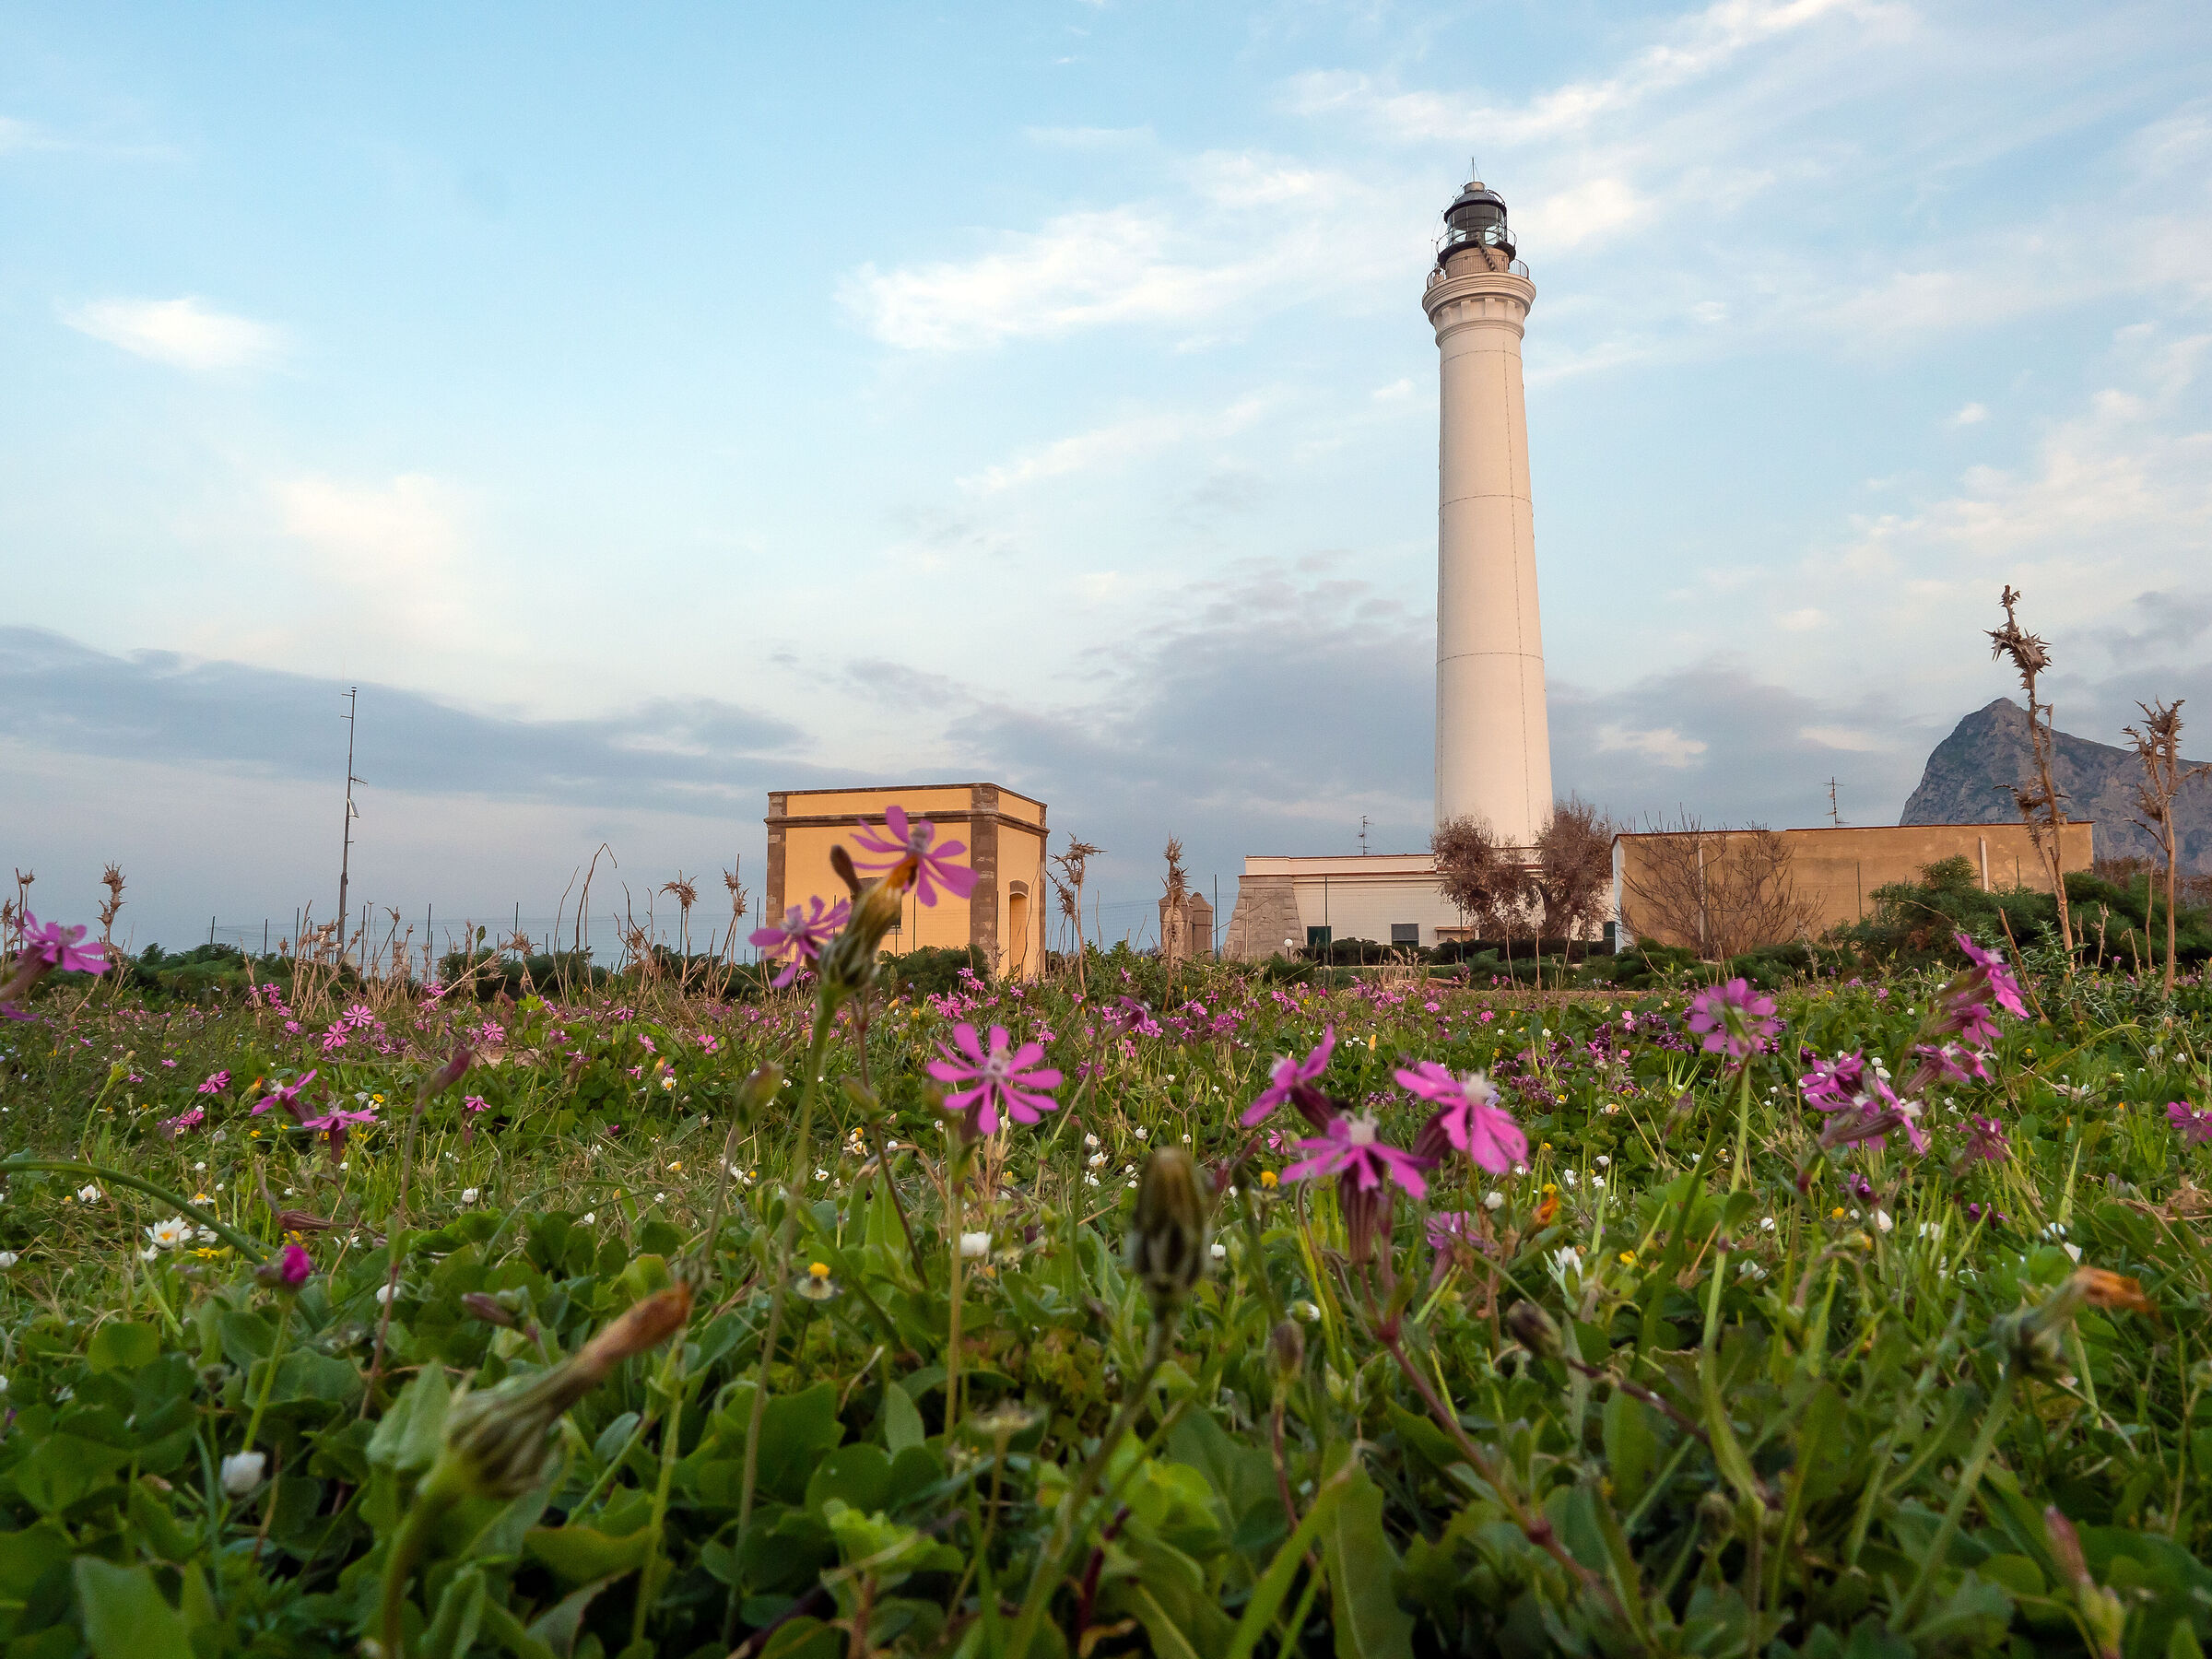 Between lighthouses and flowers...